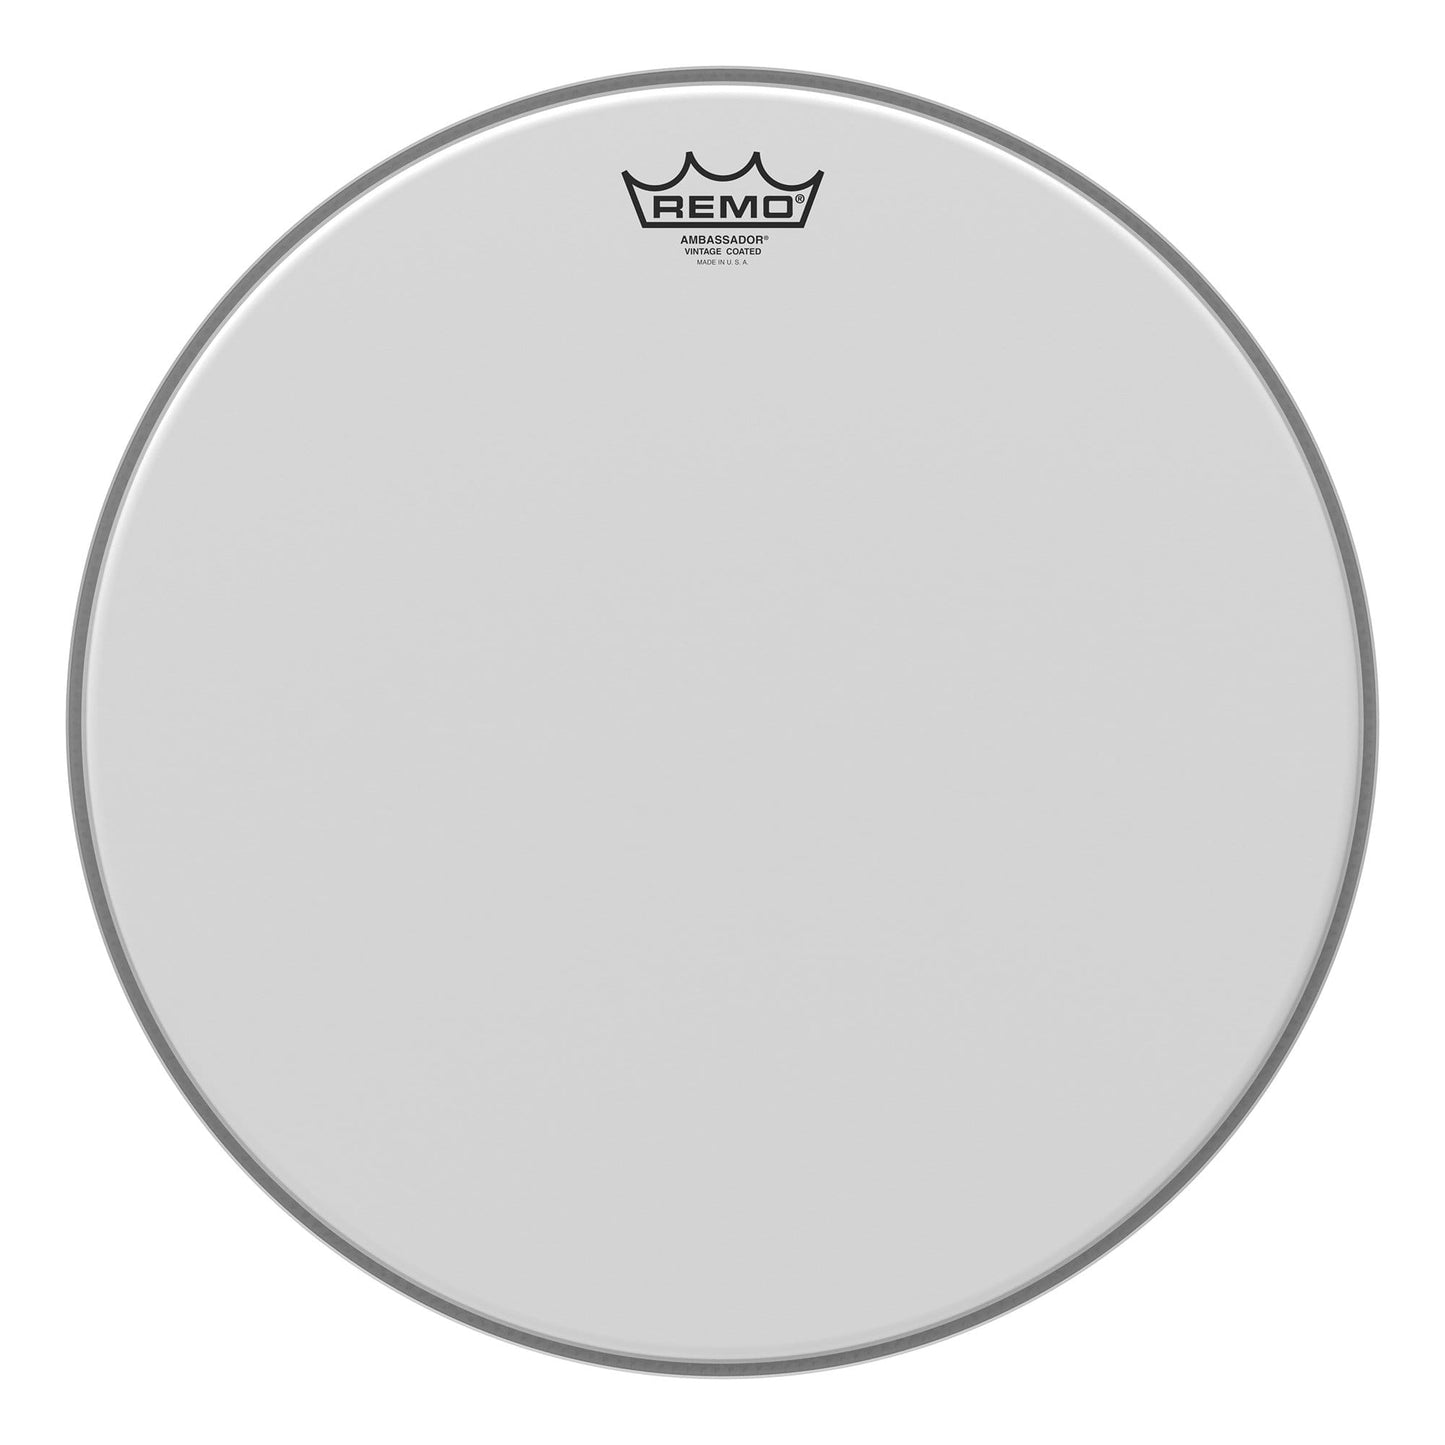 Remo 16" Ambassador Vintage Coated Drumhead Drums and Percussion / Parts and Accessories / Heads